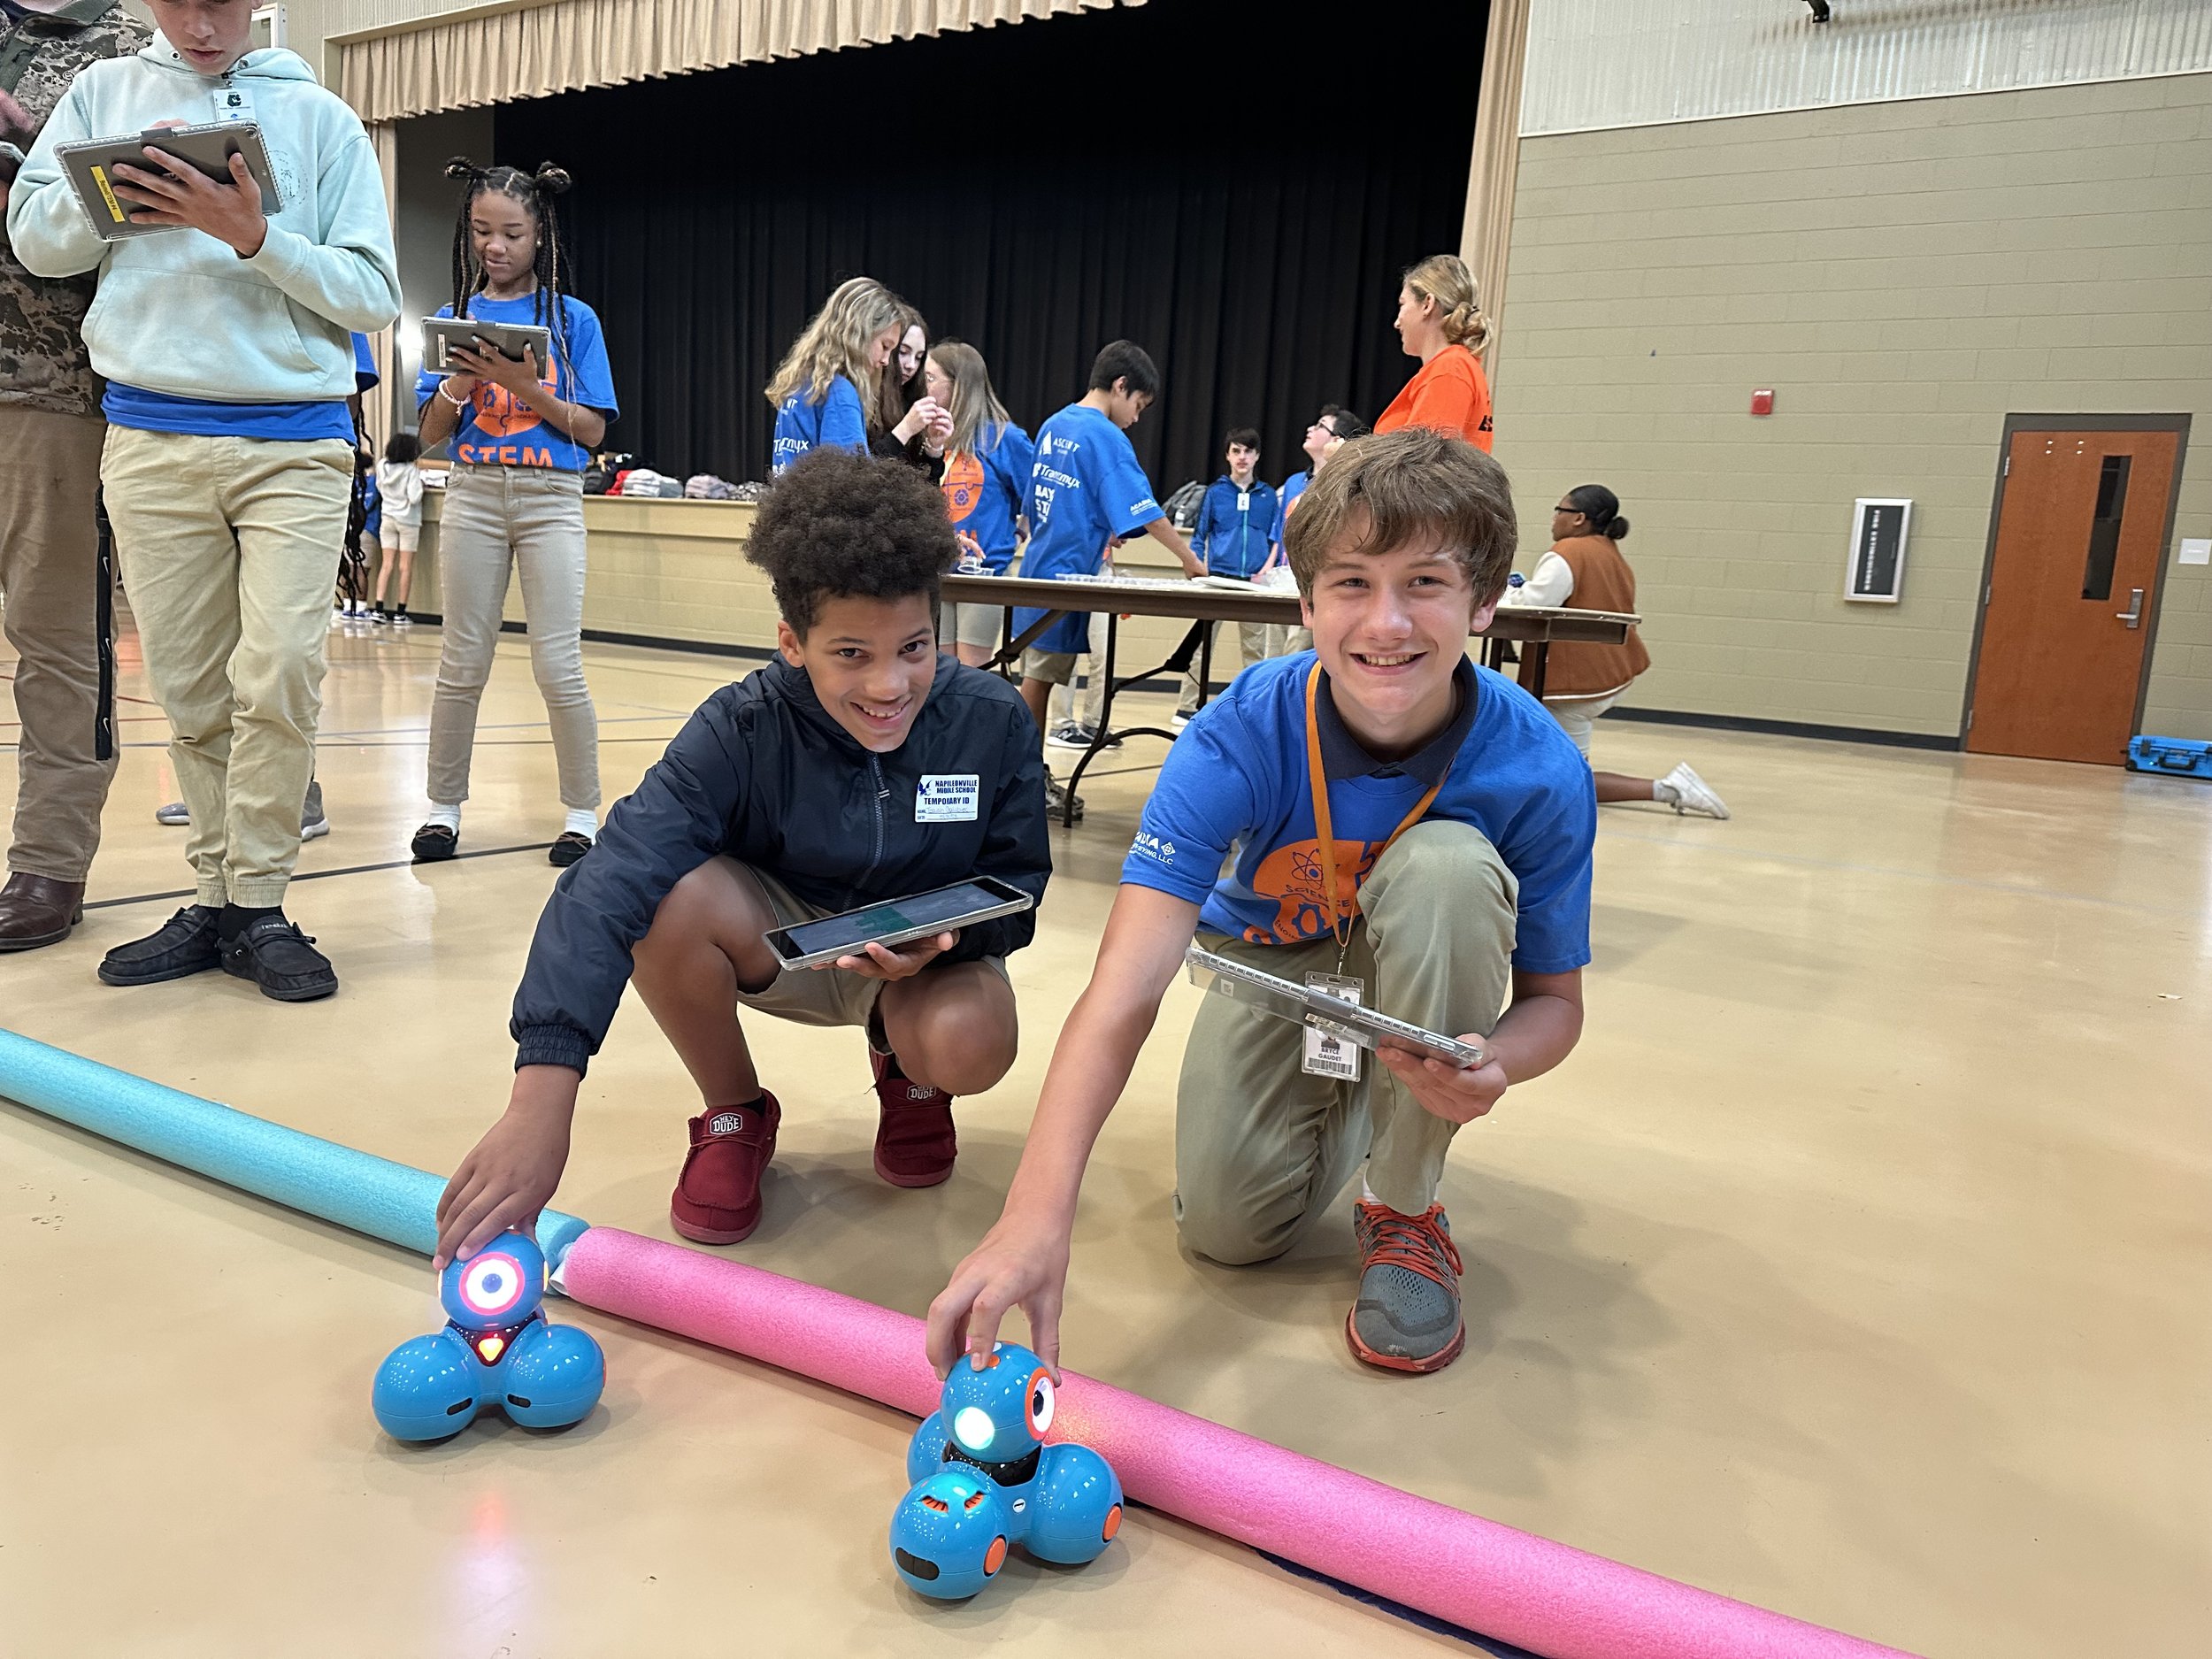  Napoleonville Middle School students Isaiah Chalubiec, left, and Bryce Gaudet, right, remotely operate small robots by programming commands on their iPads during the Assumption Parish STEM Challenge Day. 